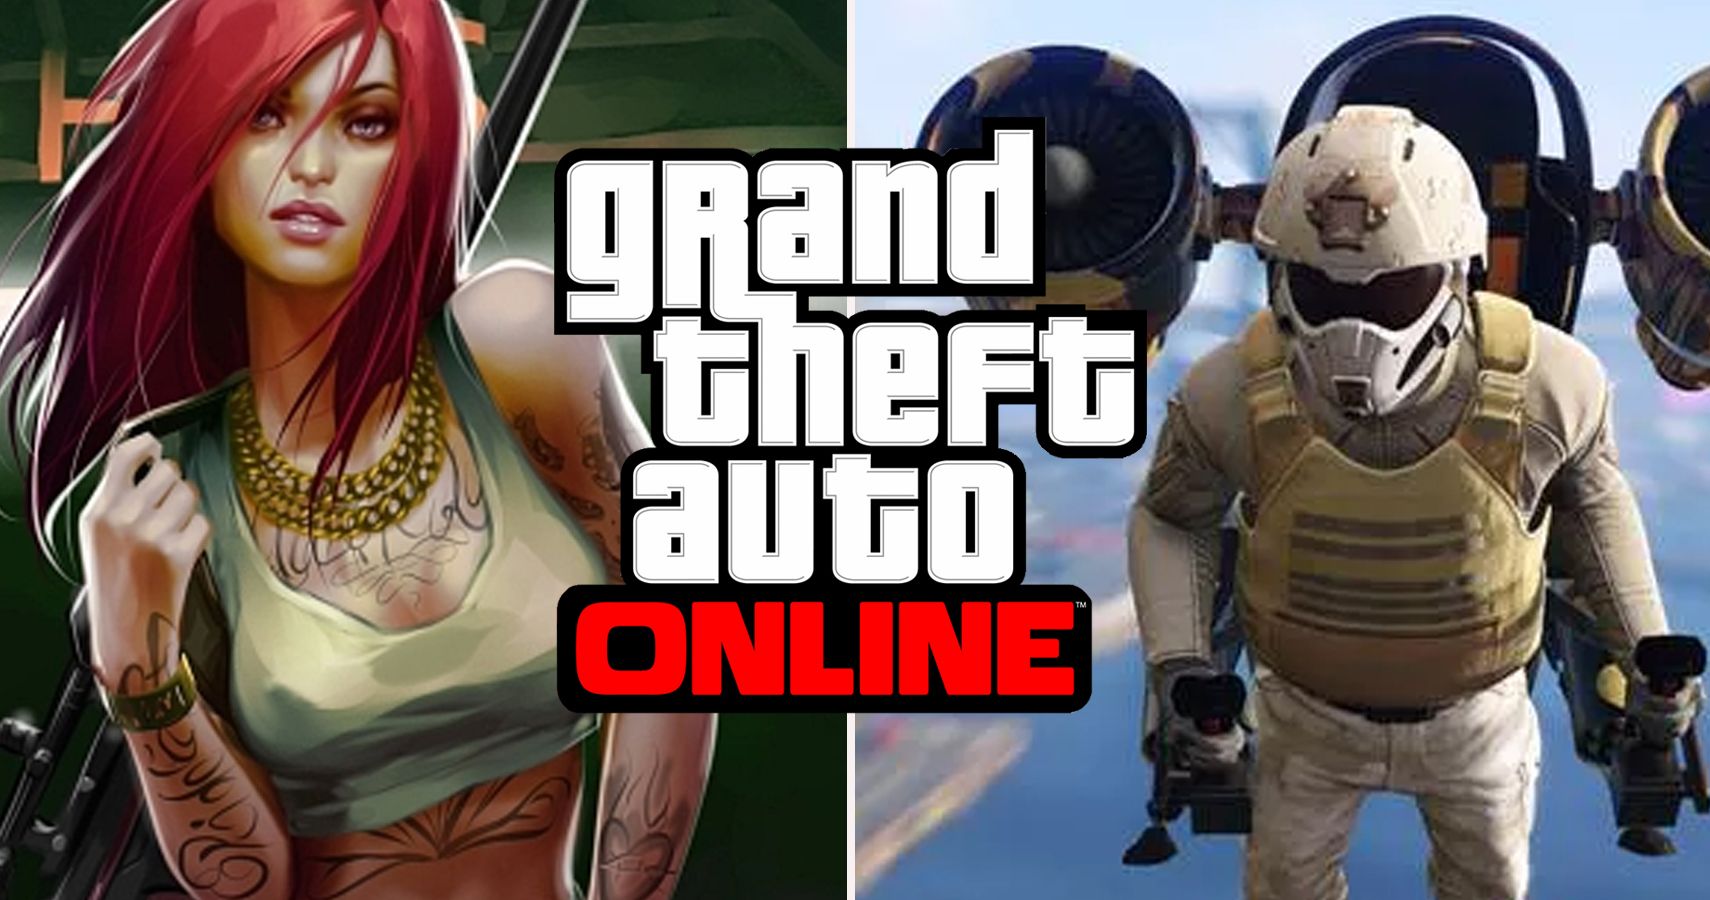 What's the worst thing y'all heard people want in GTA Online? For